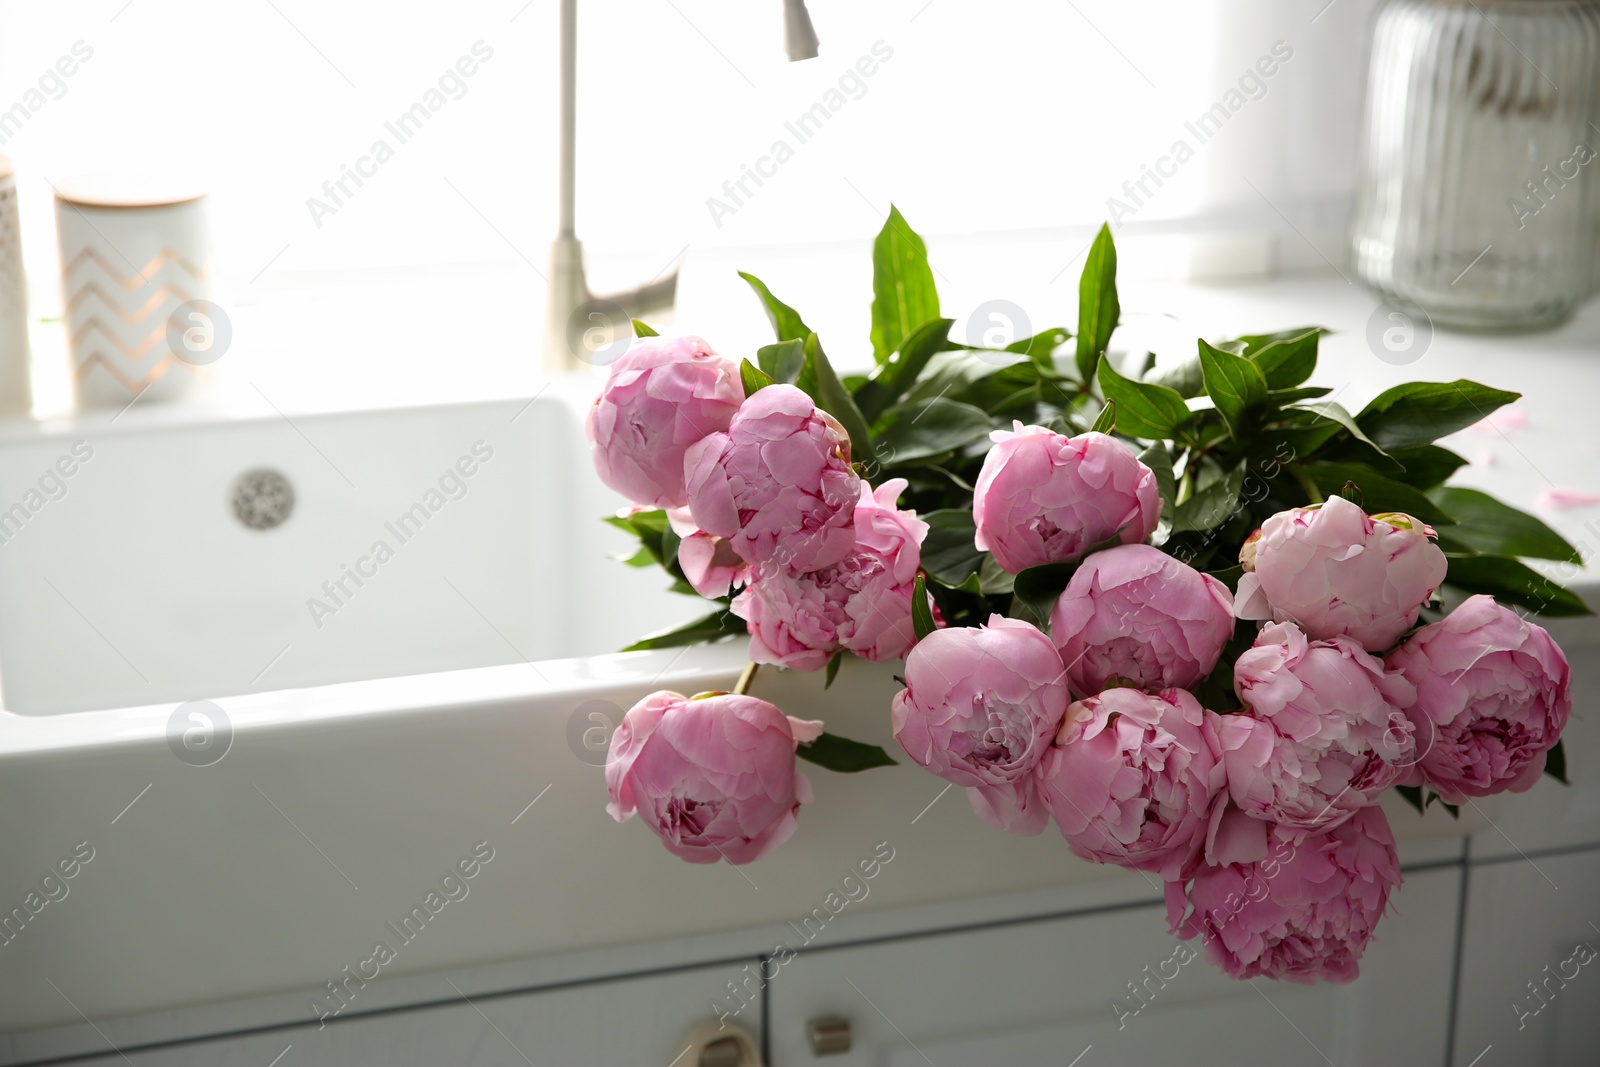 Photo of Bouquet of beautiful pink peonies in kitchen sink